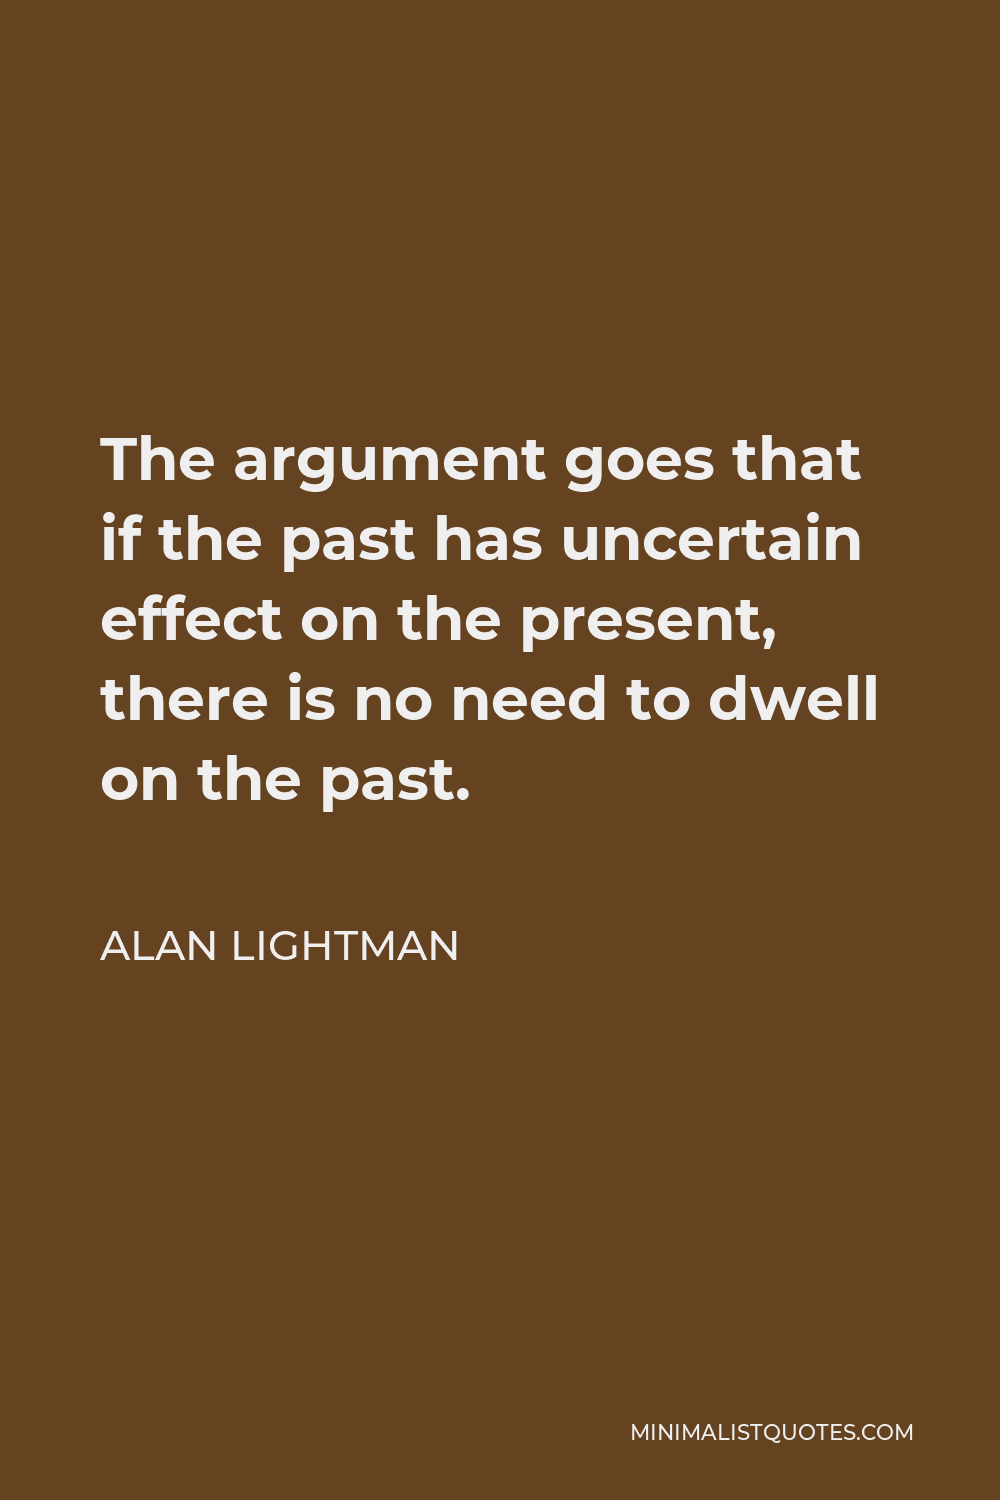 Alan Lightman Quote - The argument goes that if the past has uncertain effect on the present, there is no need to dwell on the past.